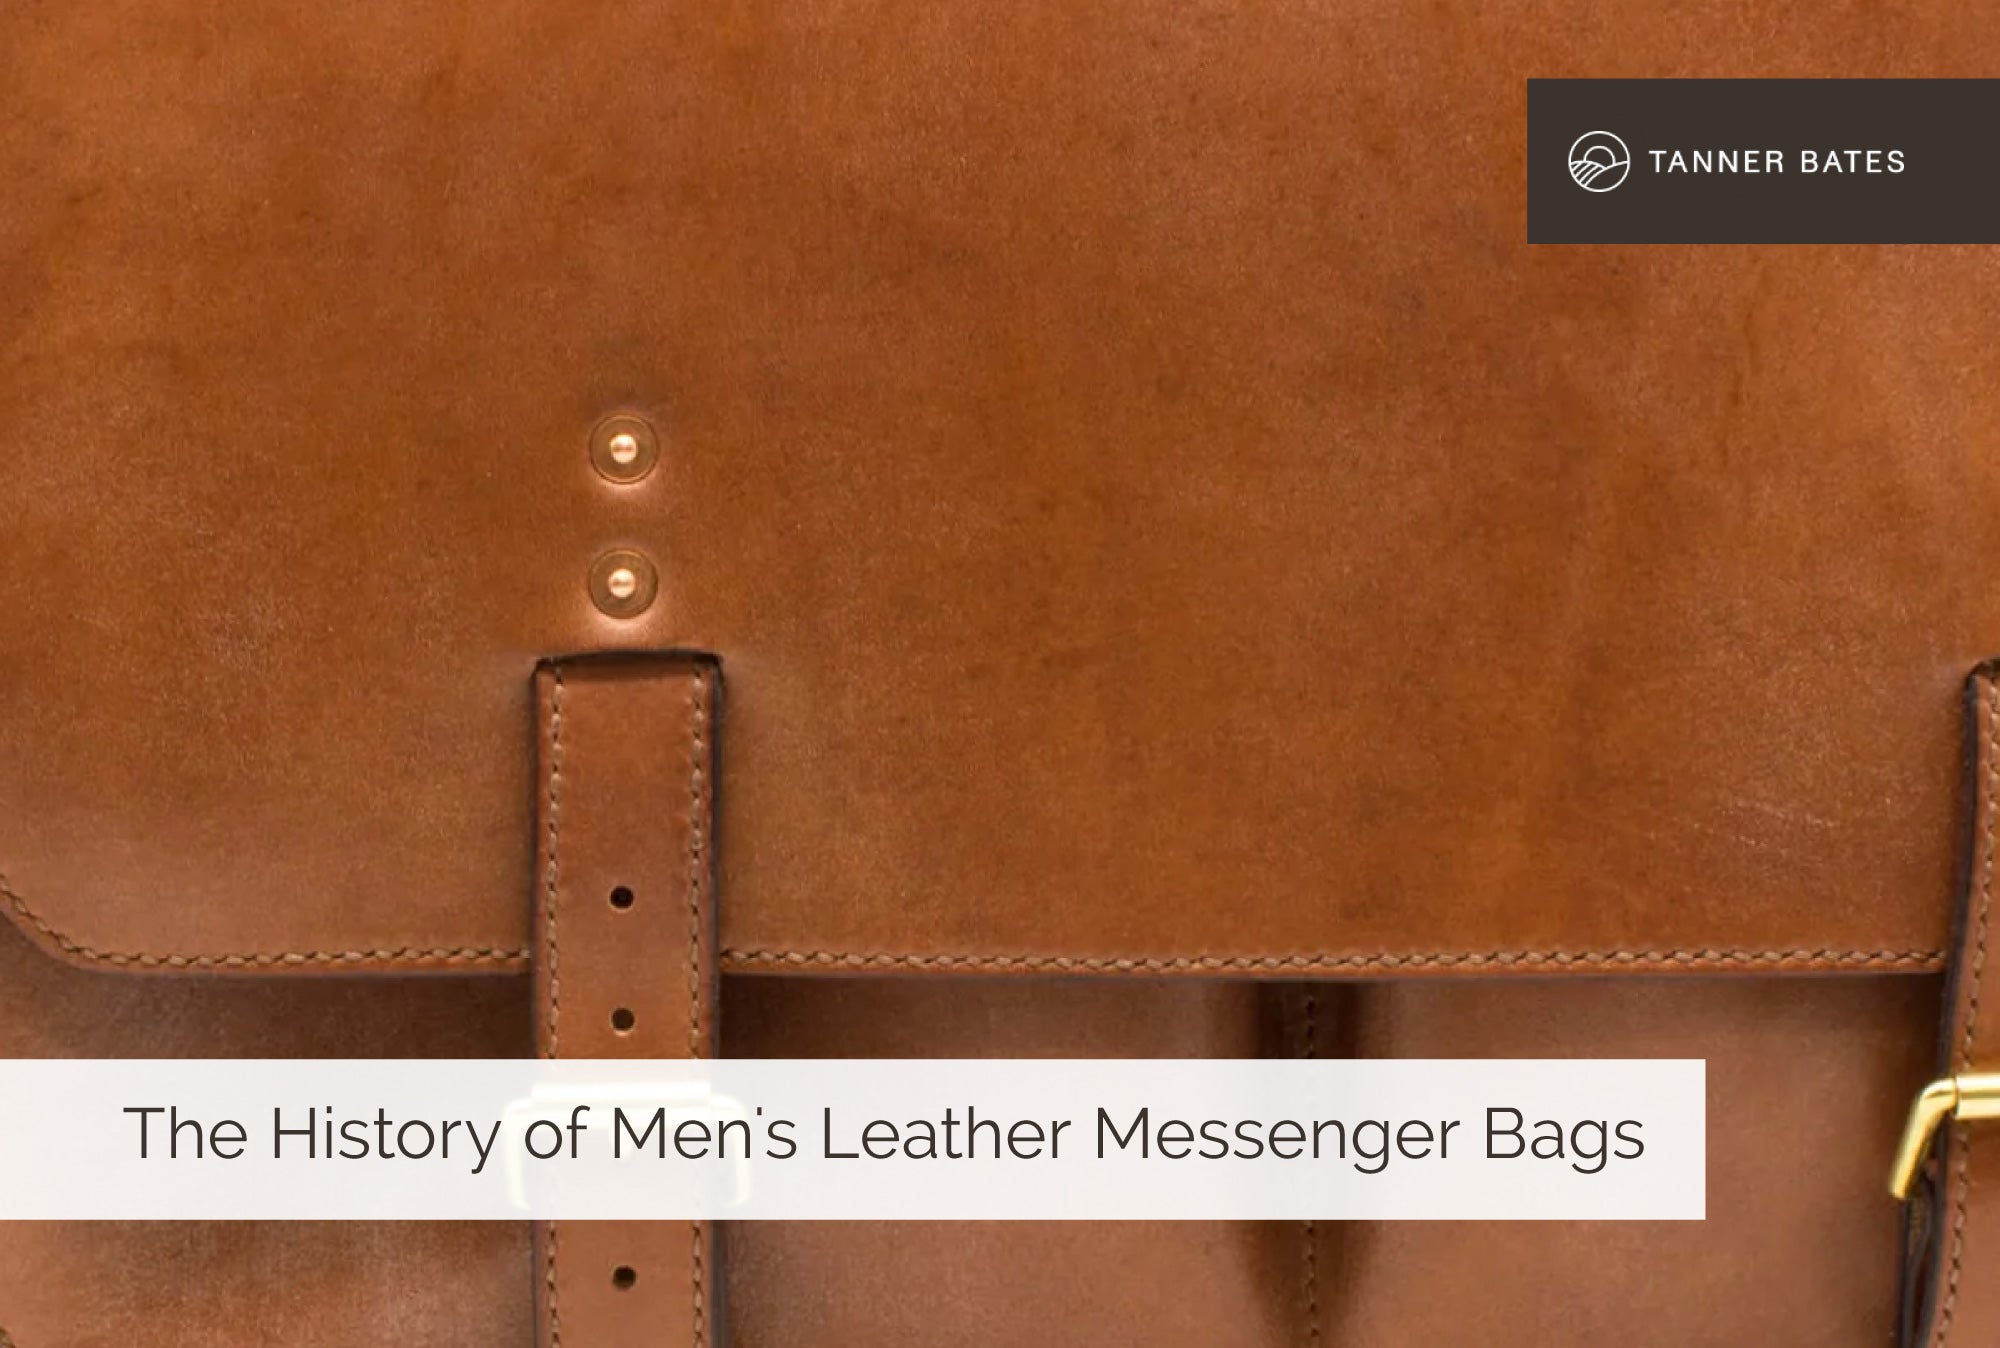 The History of Men's Leather Messenger Bags